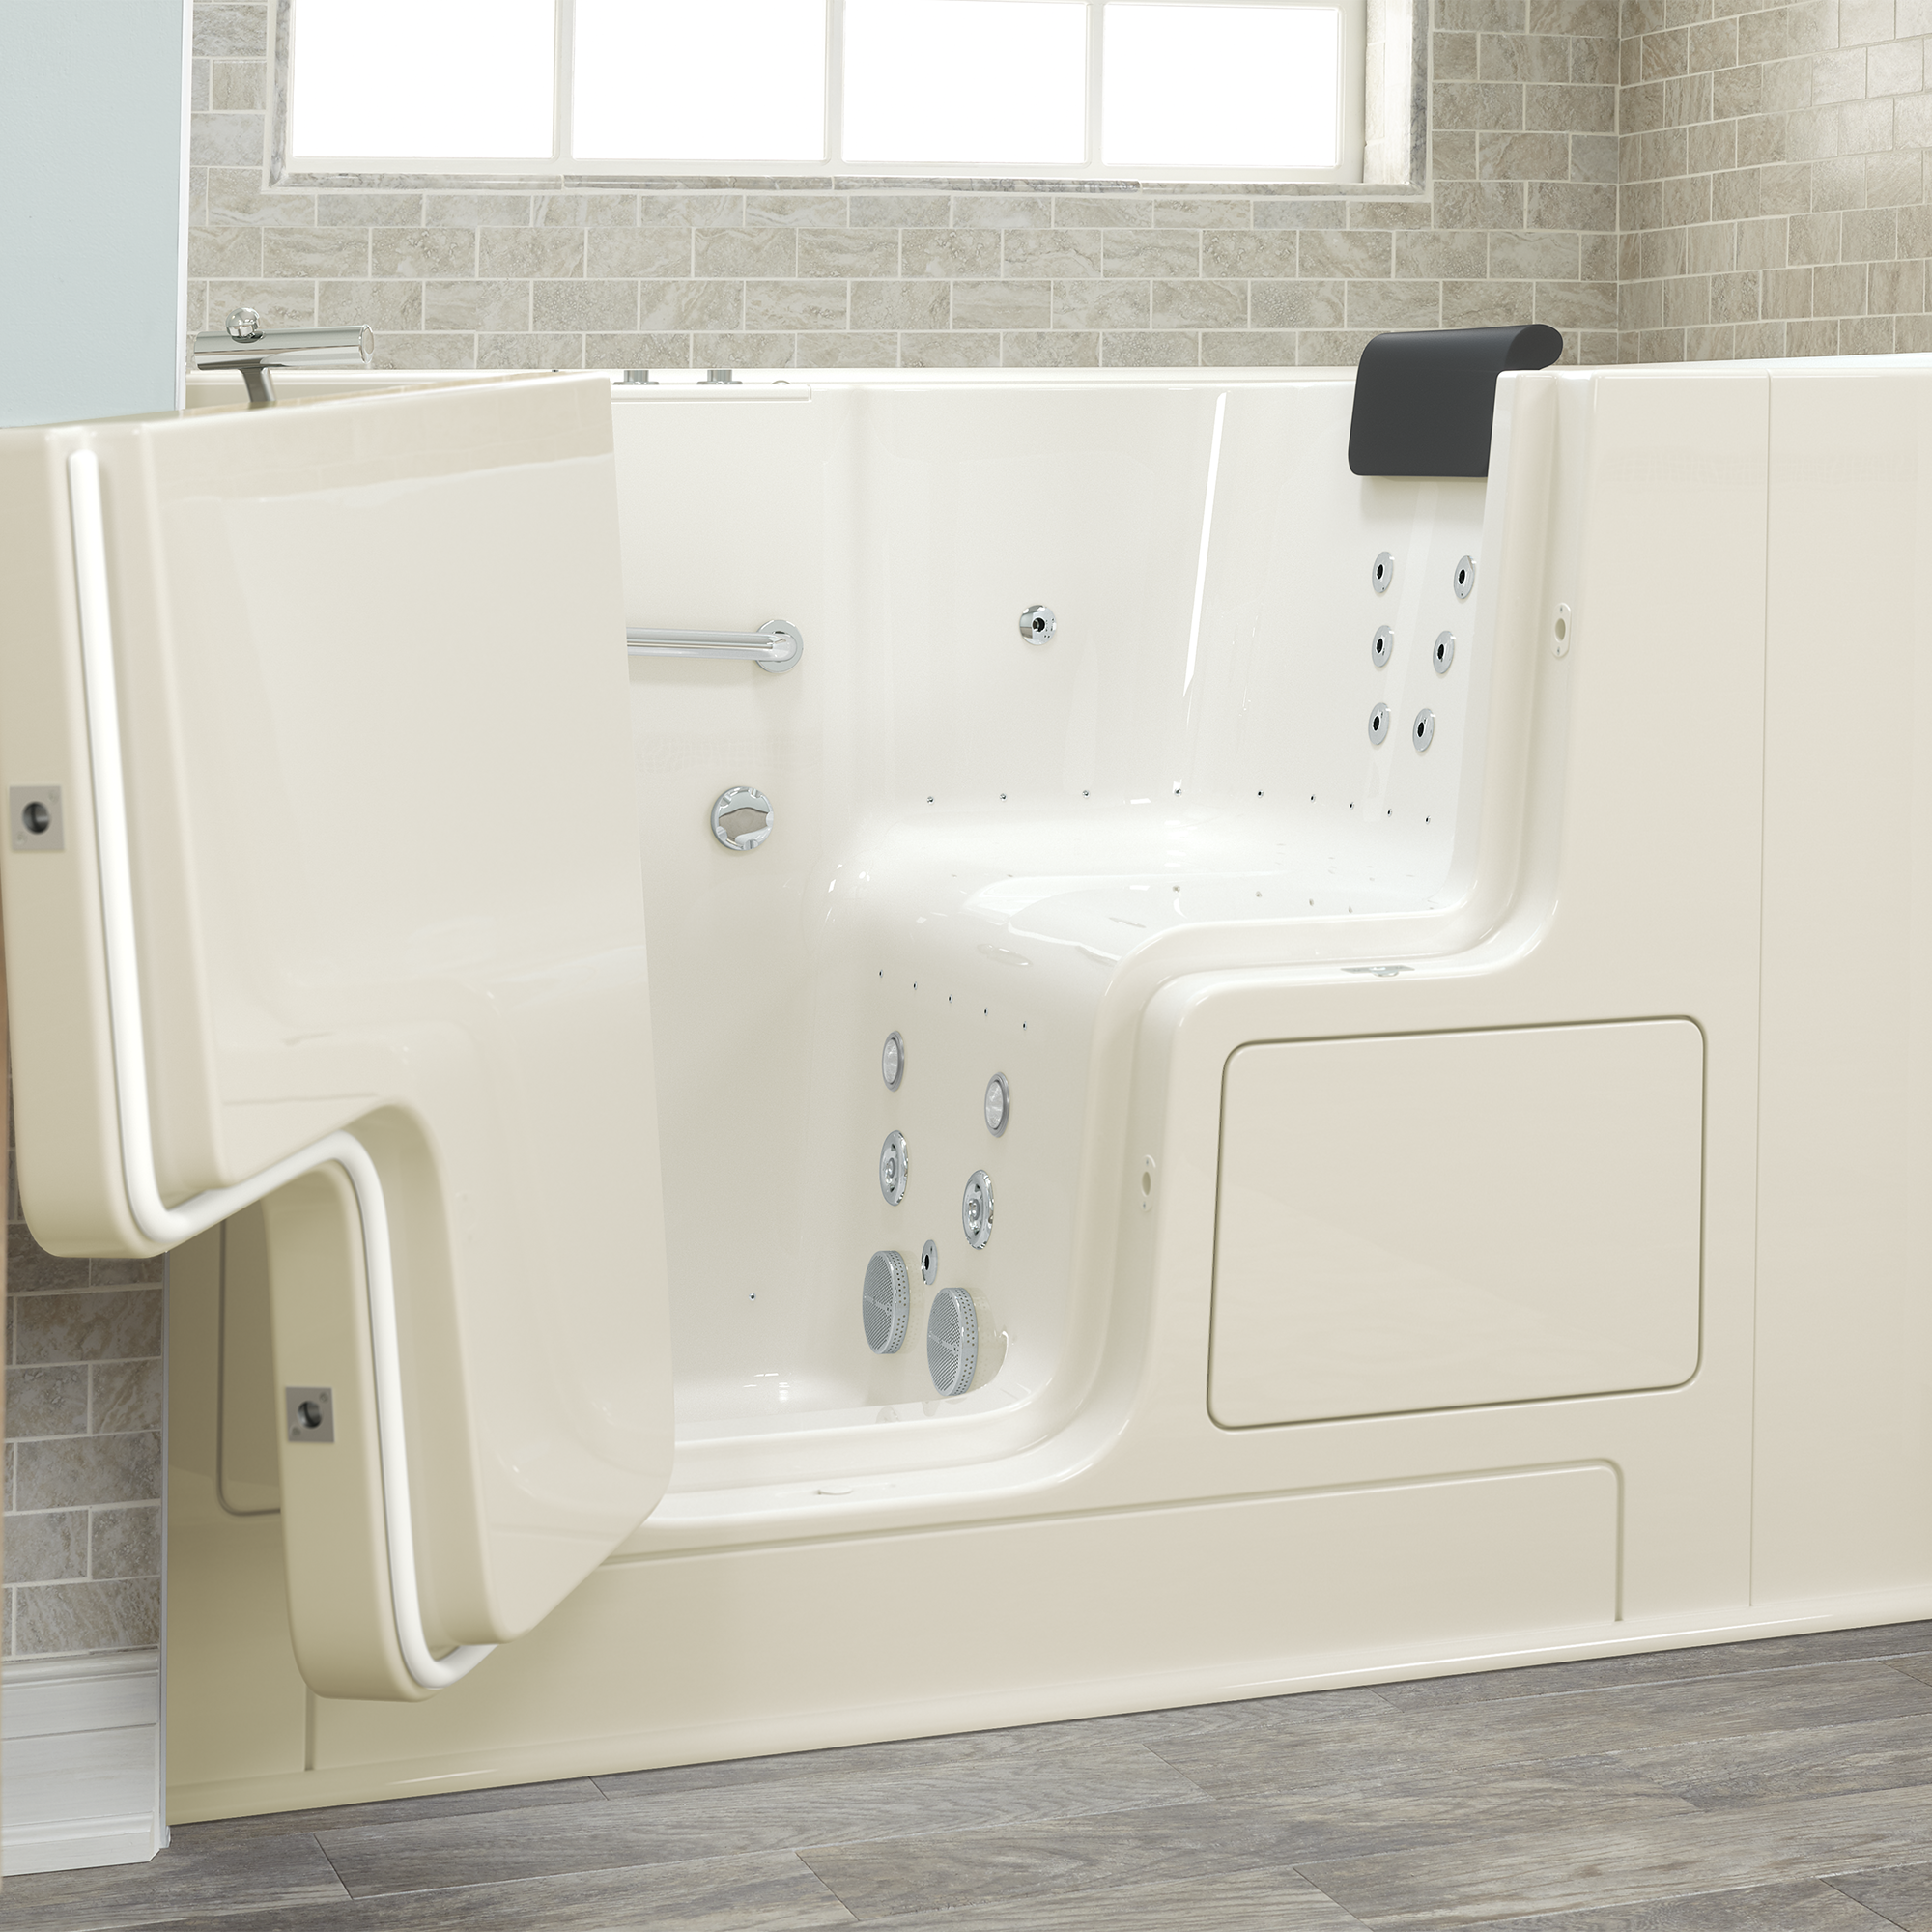 Gelcoat Premium Series 32 x 52 -Inch Walk-in Tub With Combination Air Spa and Whirlpool Systems - Left-Hand Drain